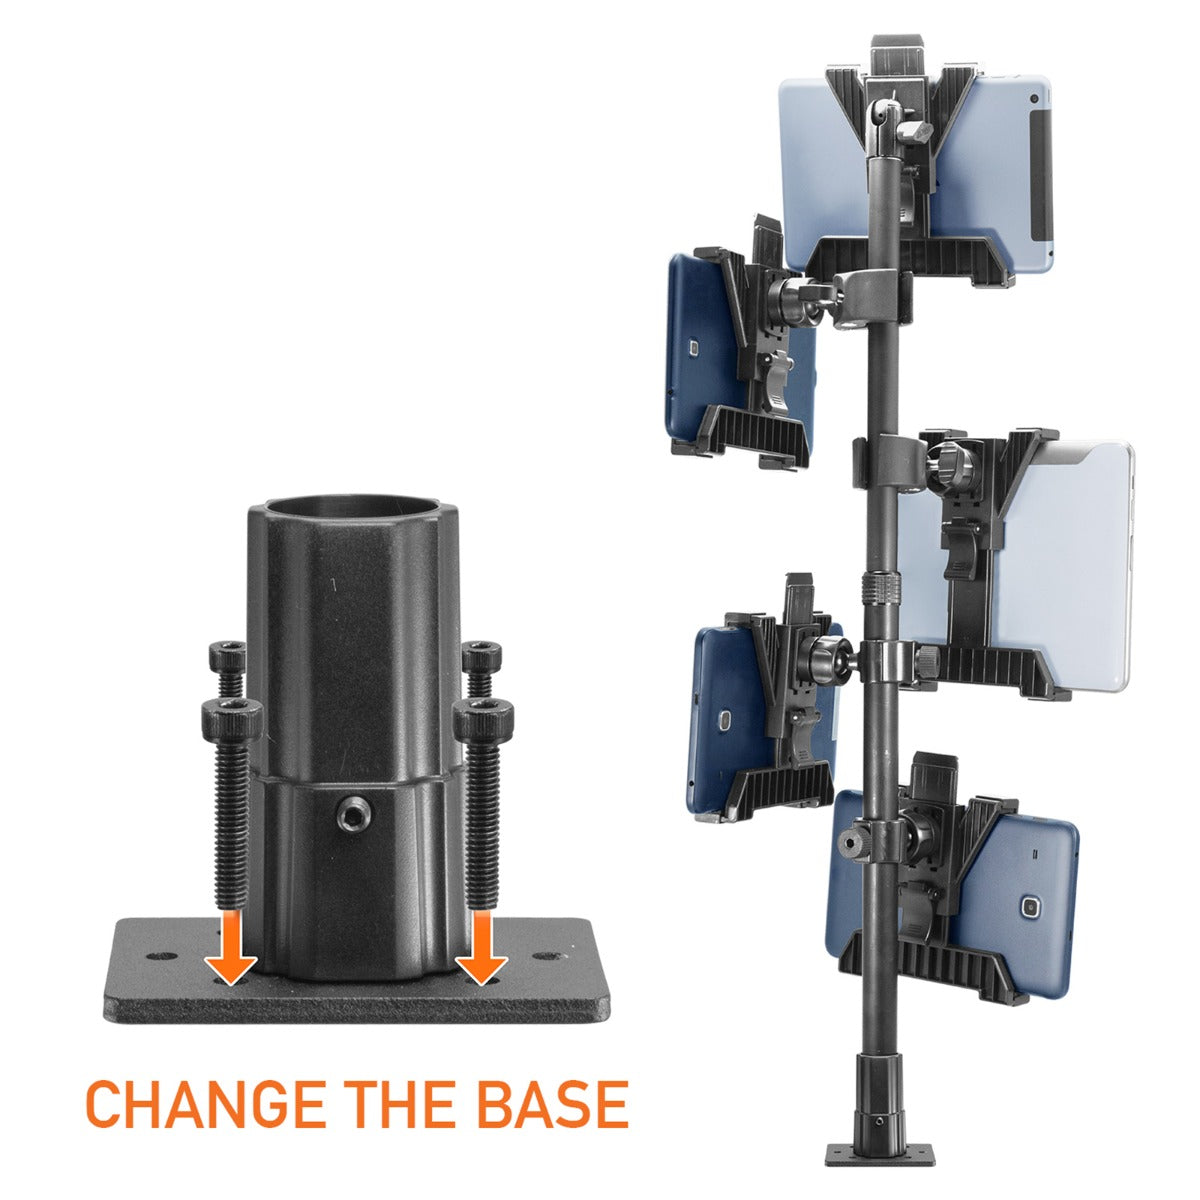 iBOLT Tablet Tower- TabDock™ POS Clamp Mount - with 5 Tablet Holders